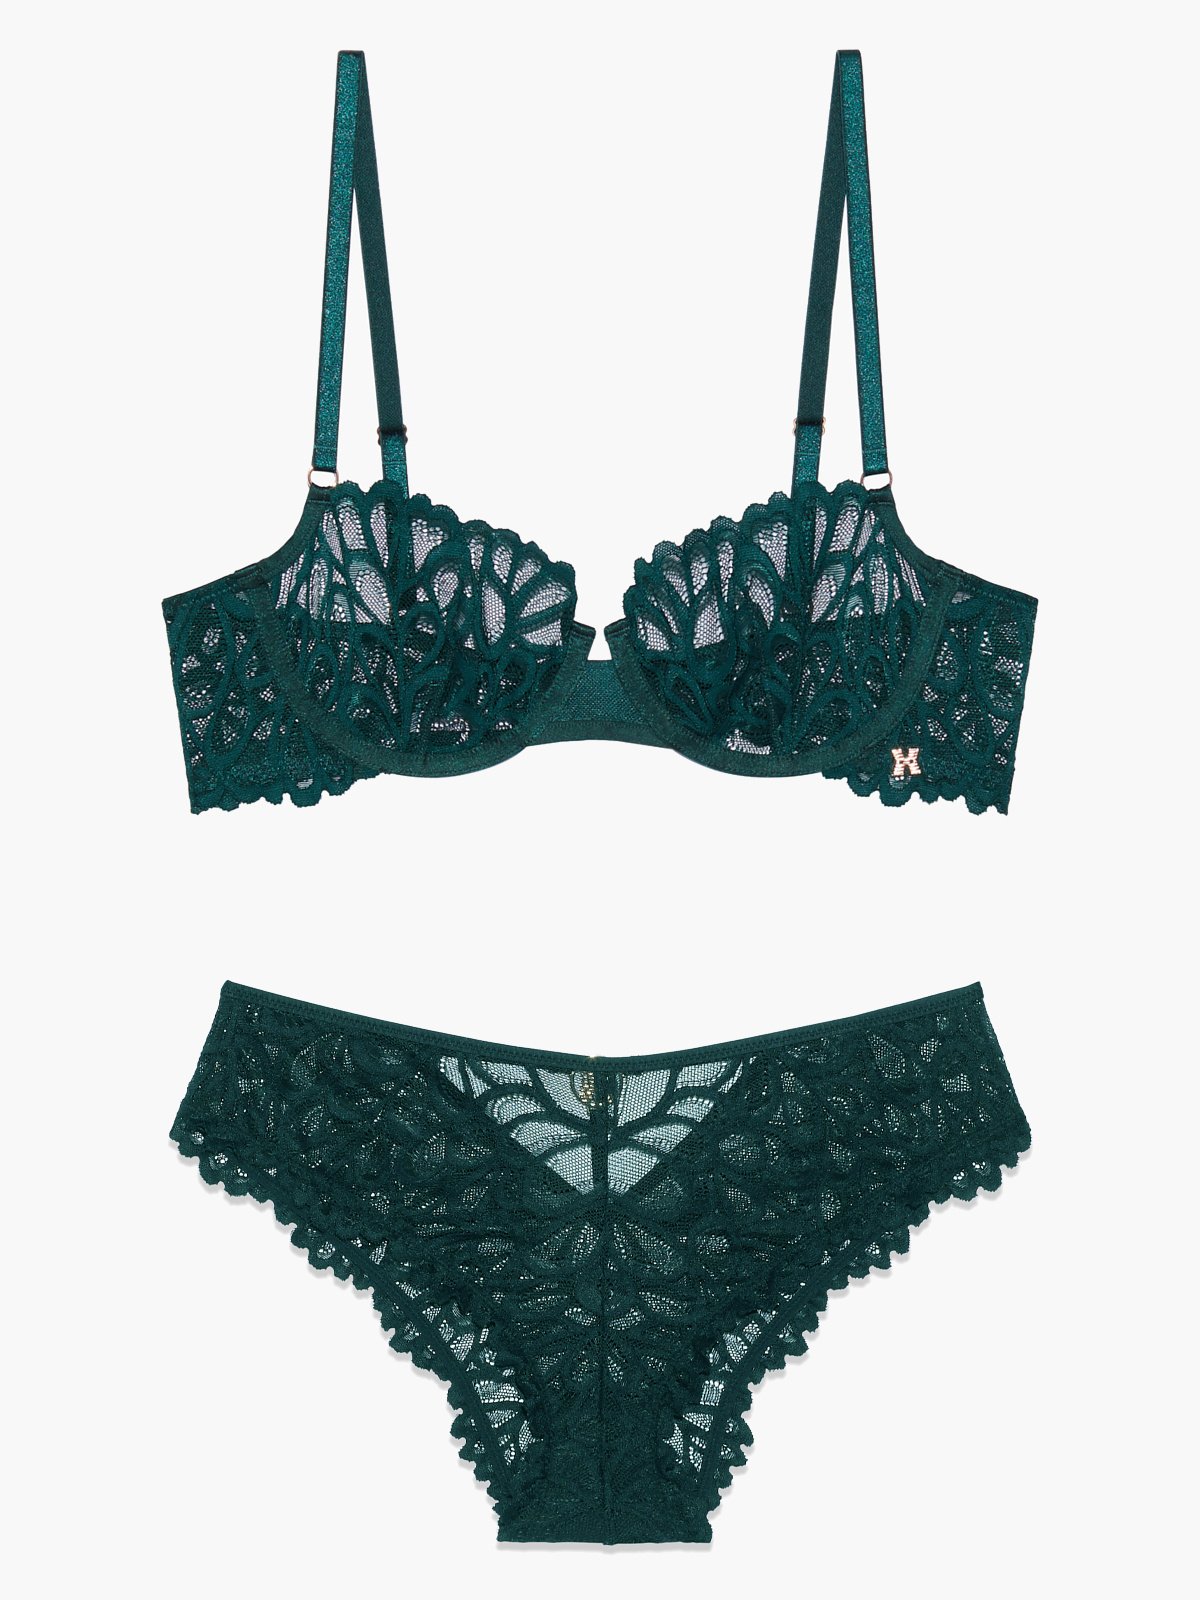 Shadowplay Lace Cheeky Panty In Black SAVAGE X FENTY, 53% OFF